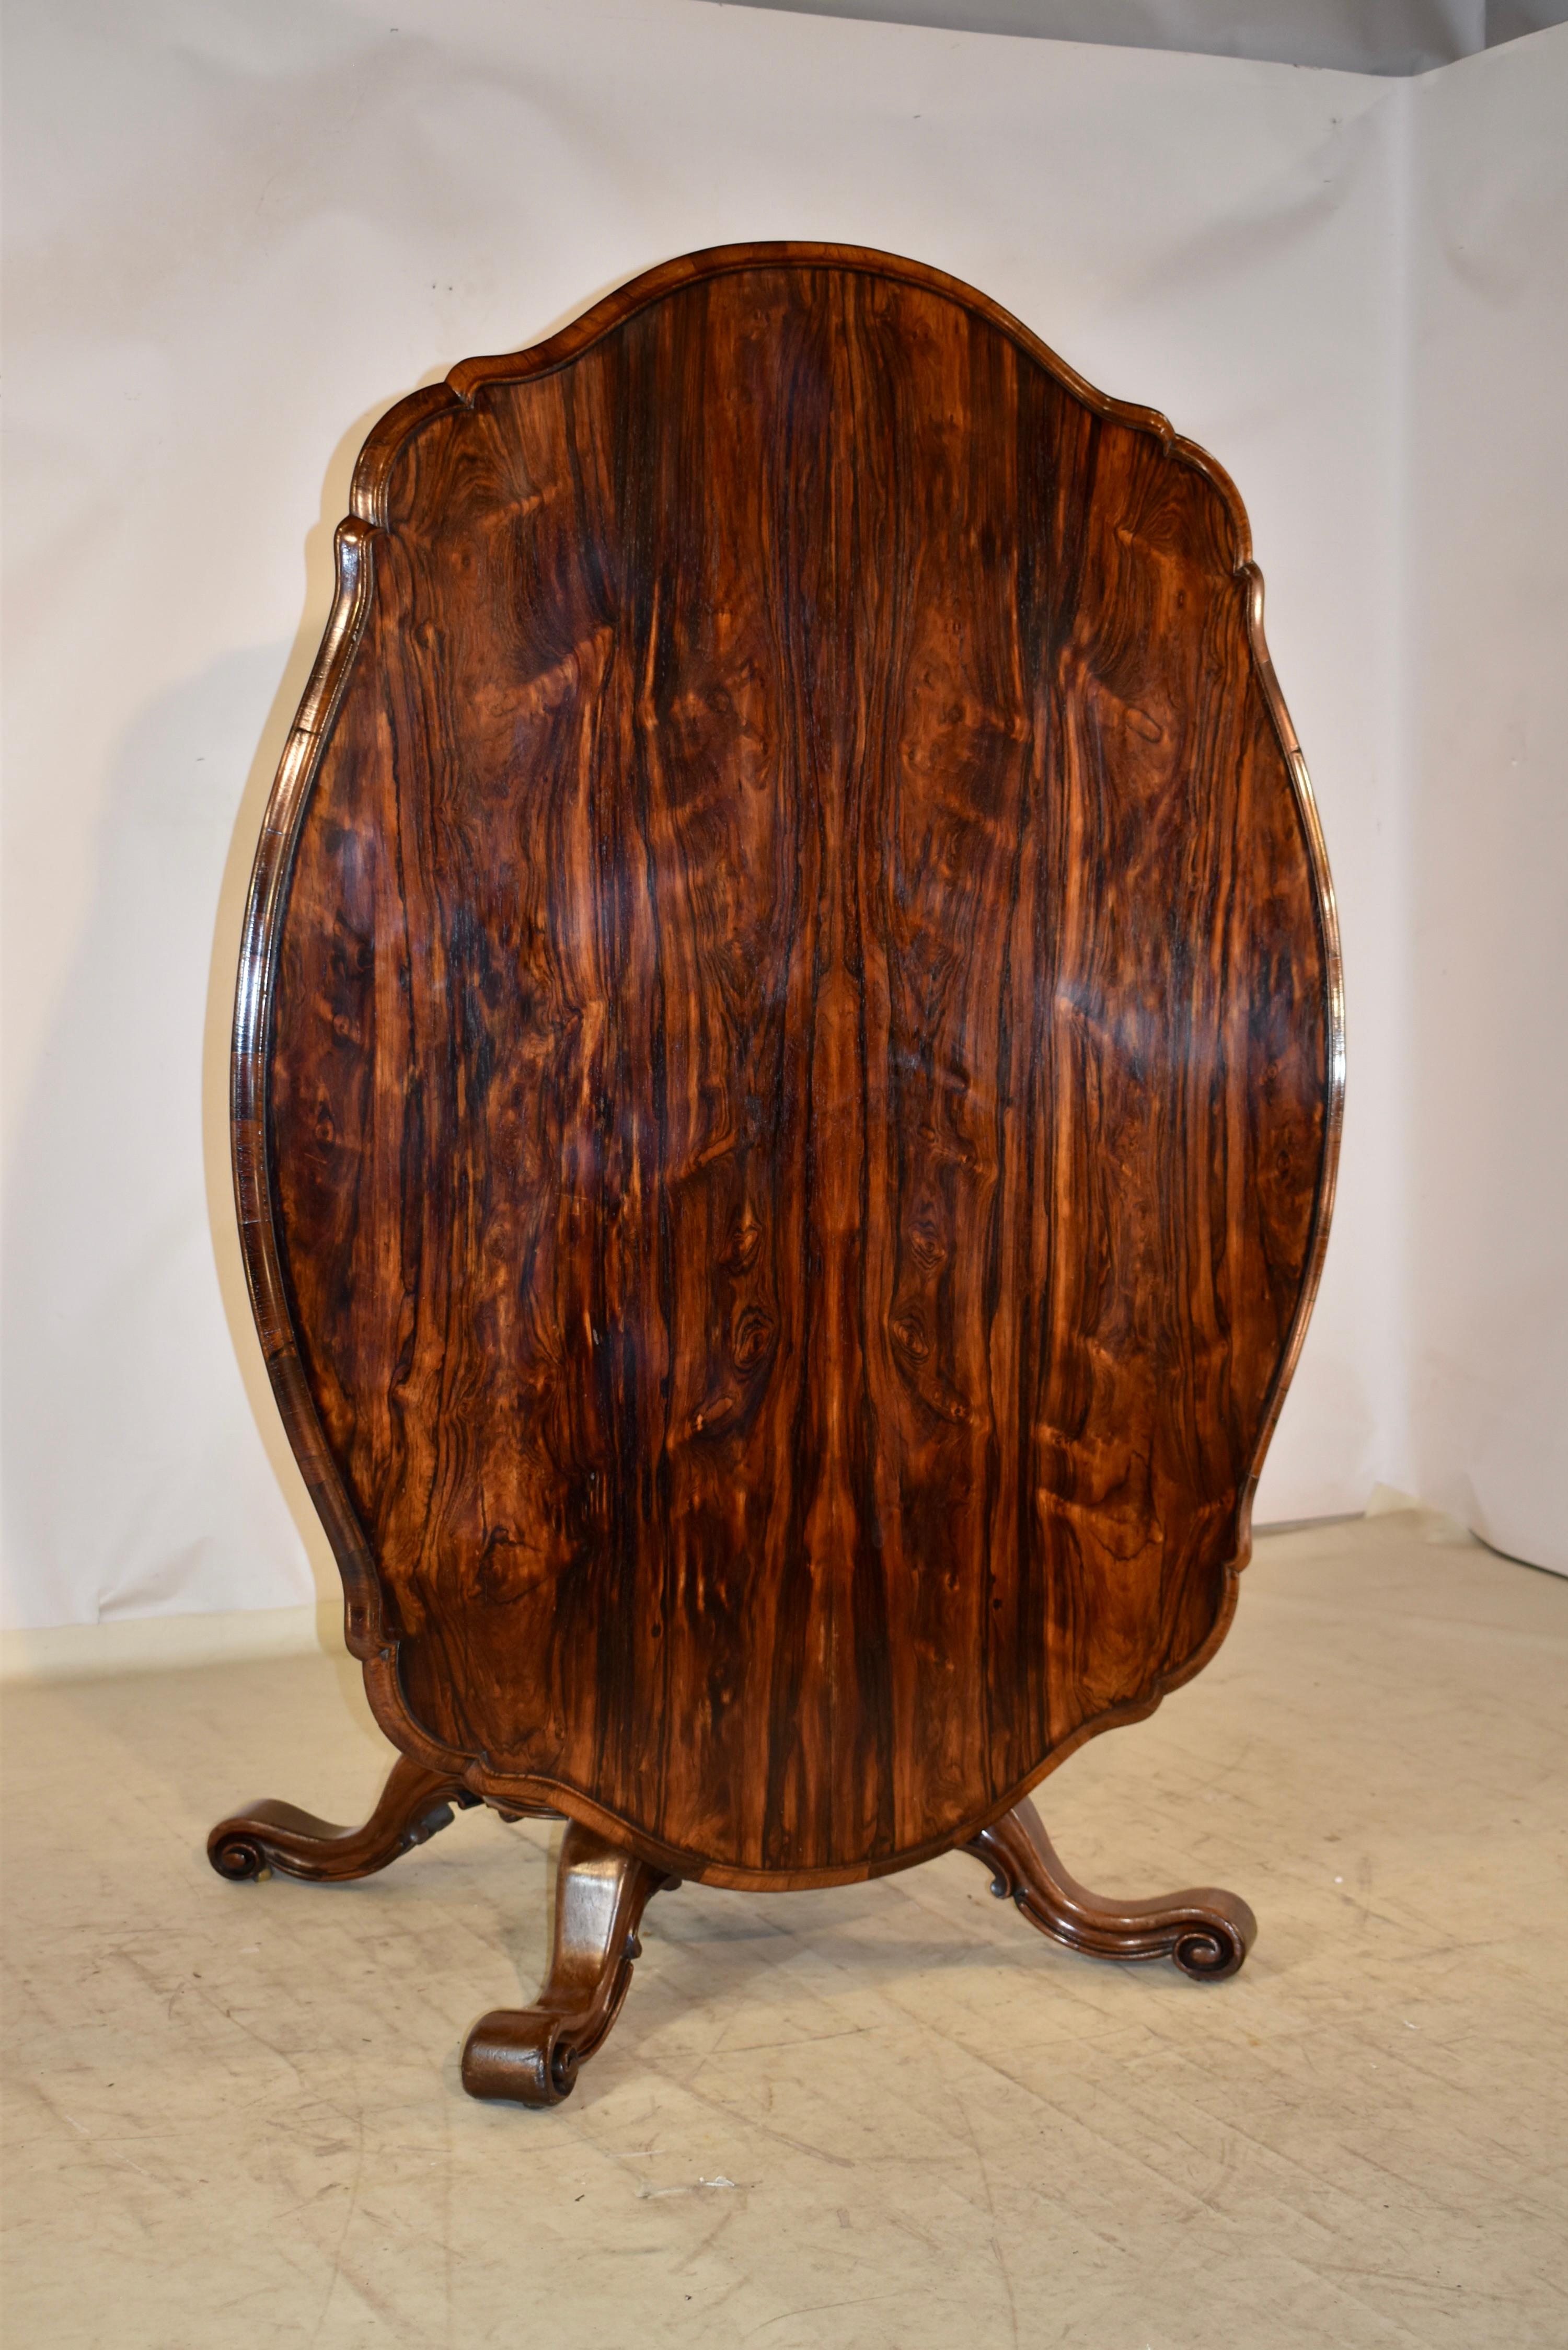 19th century tilt-top table from England, made from rosewood.  The top is absolutely stunning!  It has a shaped and beveled edge around the top, which surrounds a gloriously grained rosewood top.  the top sits upon a fantastic and detailed base. 